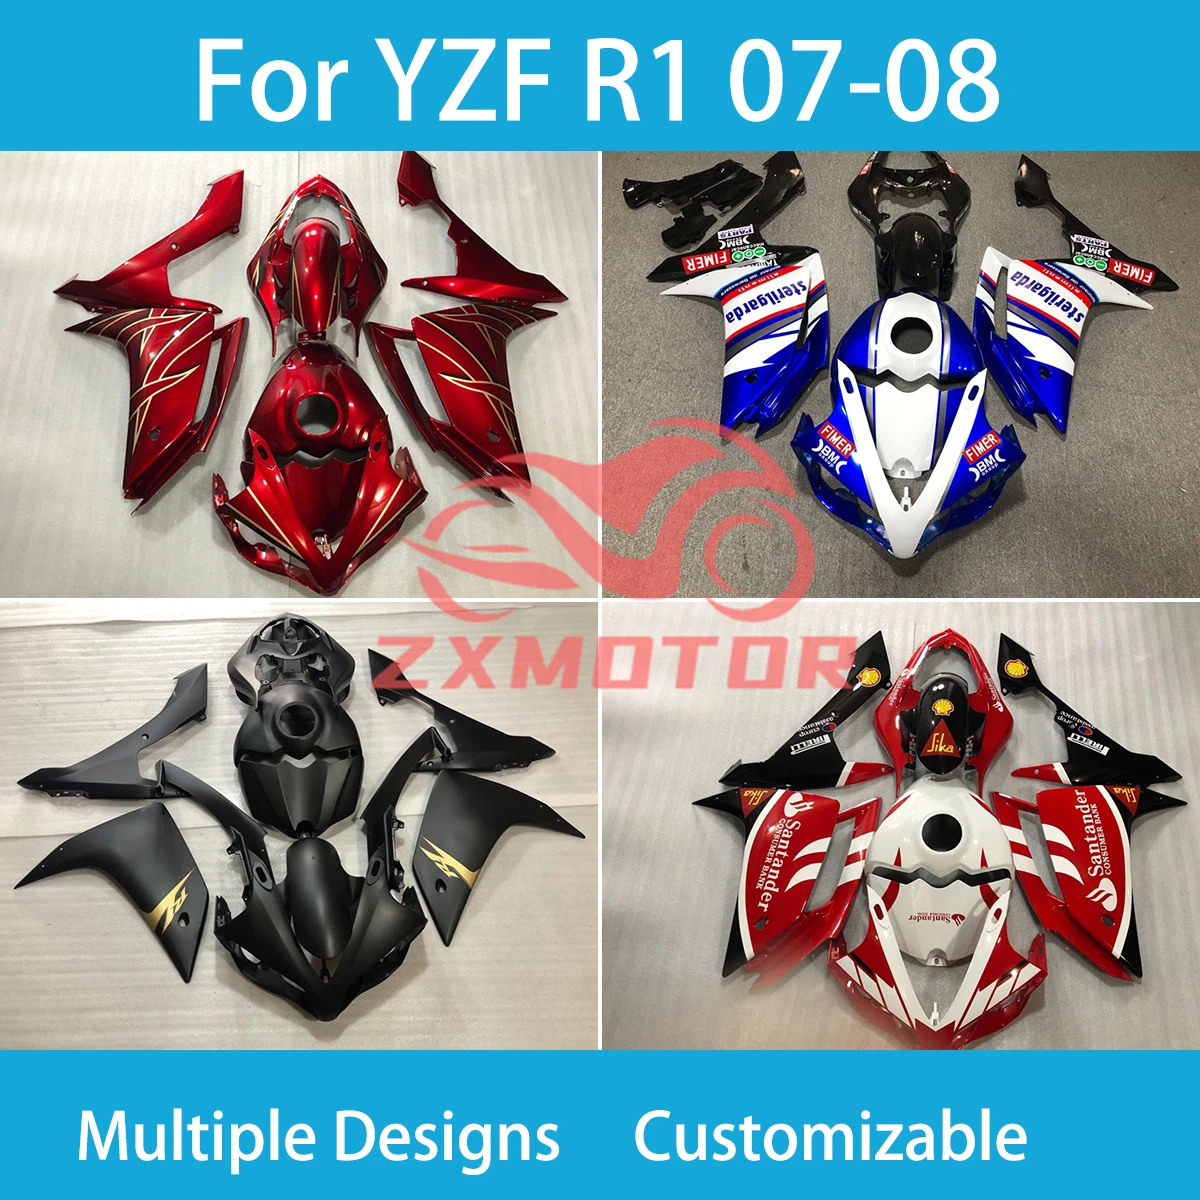 

YZF R 1 2007 2008 Hot Style Fairings for Yamaha YZF R1 07 08 ABS Injection Motorcycle Accessory Complete Fairing Bodywork Kit